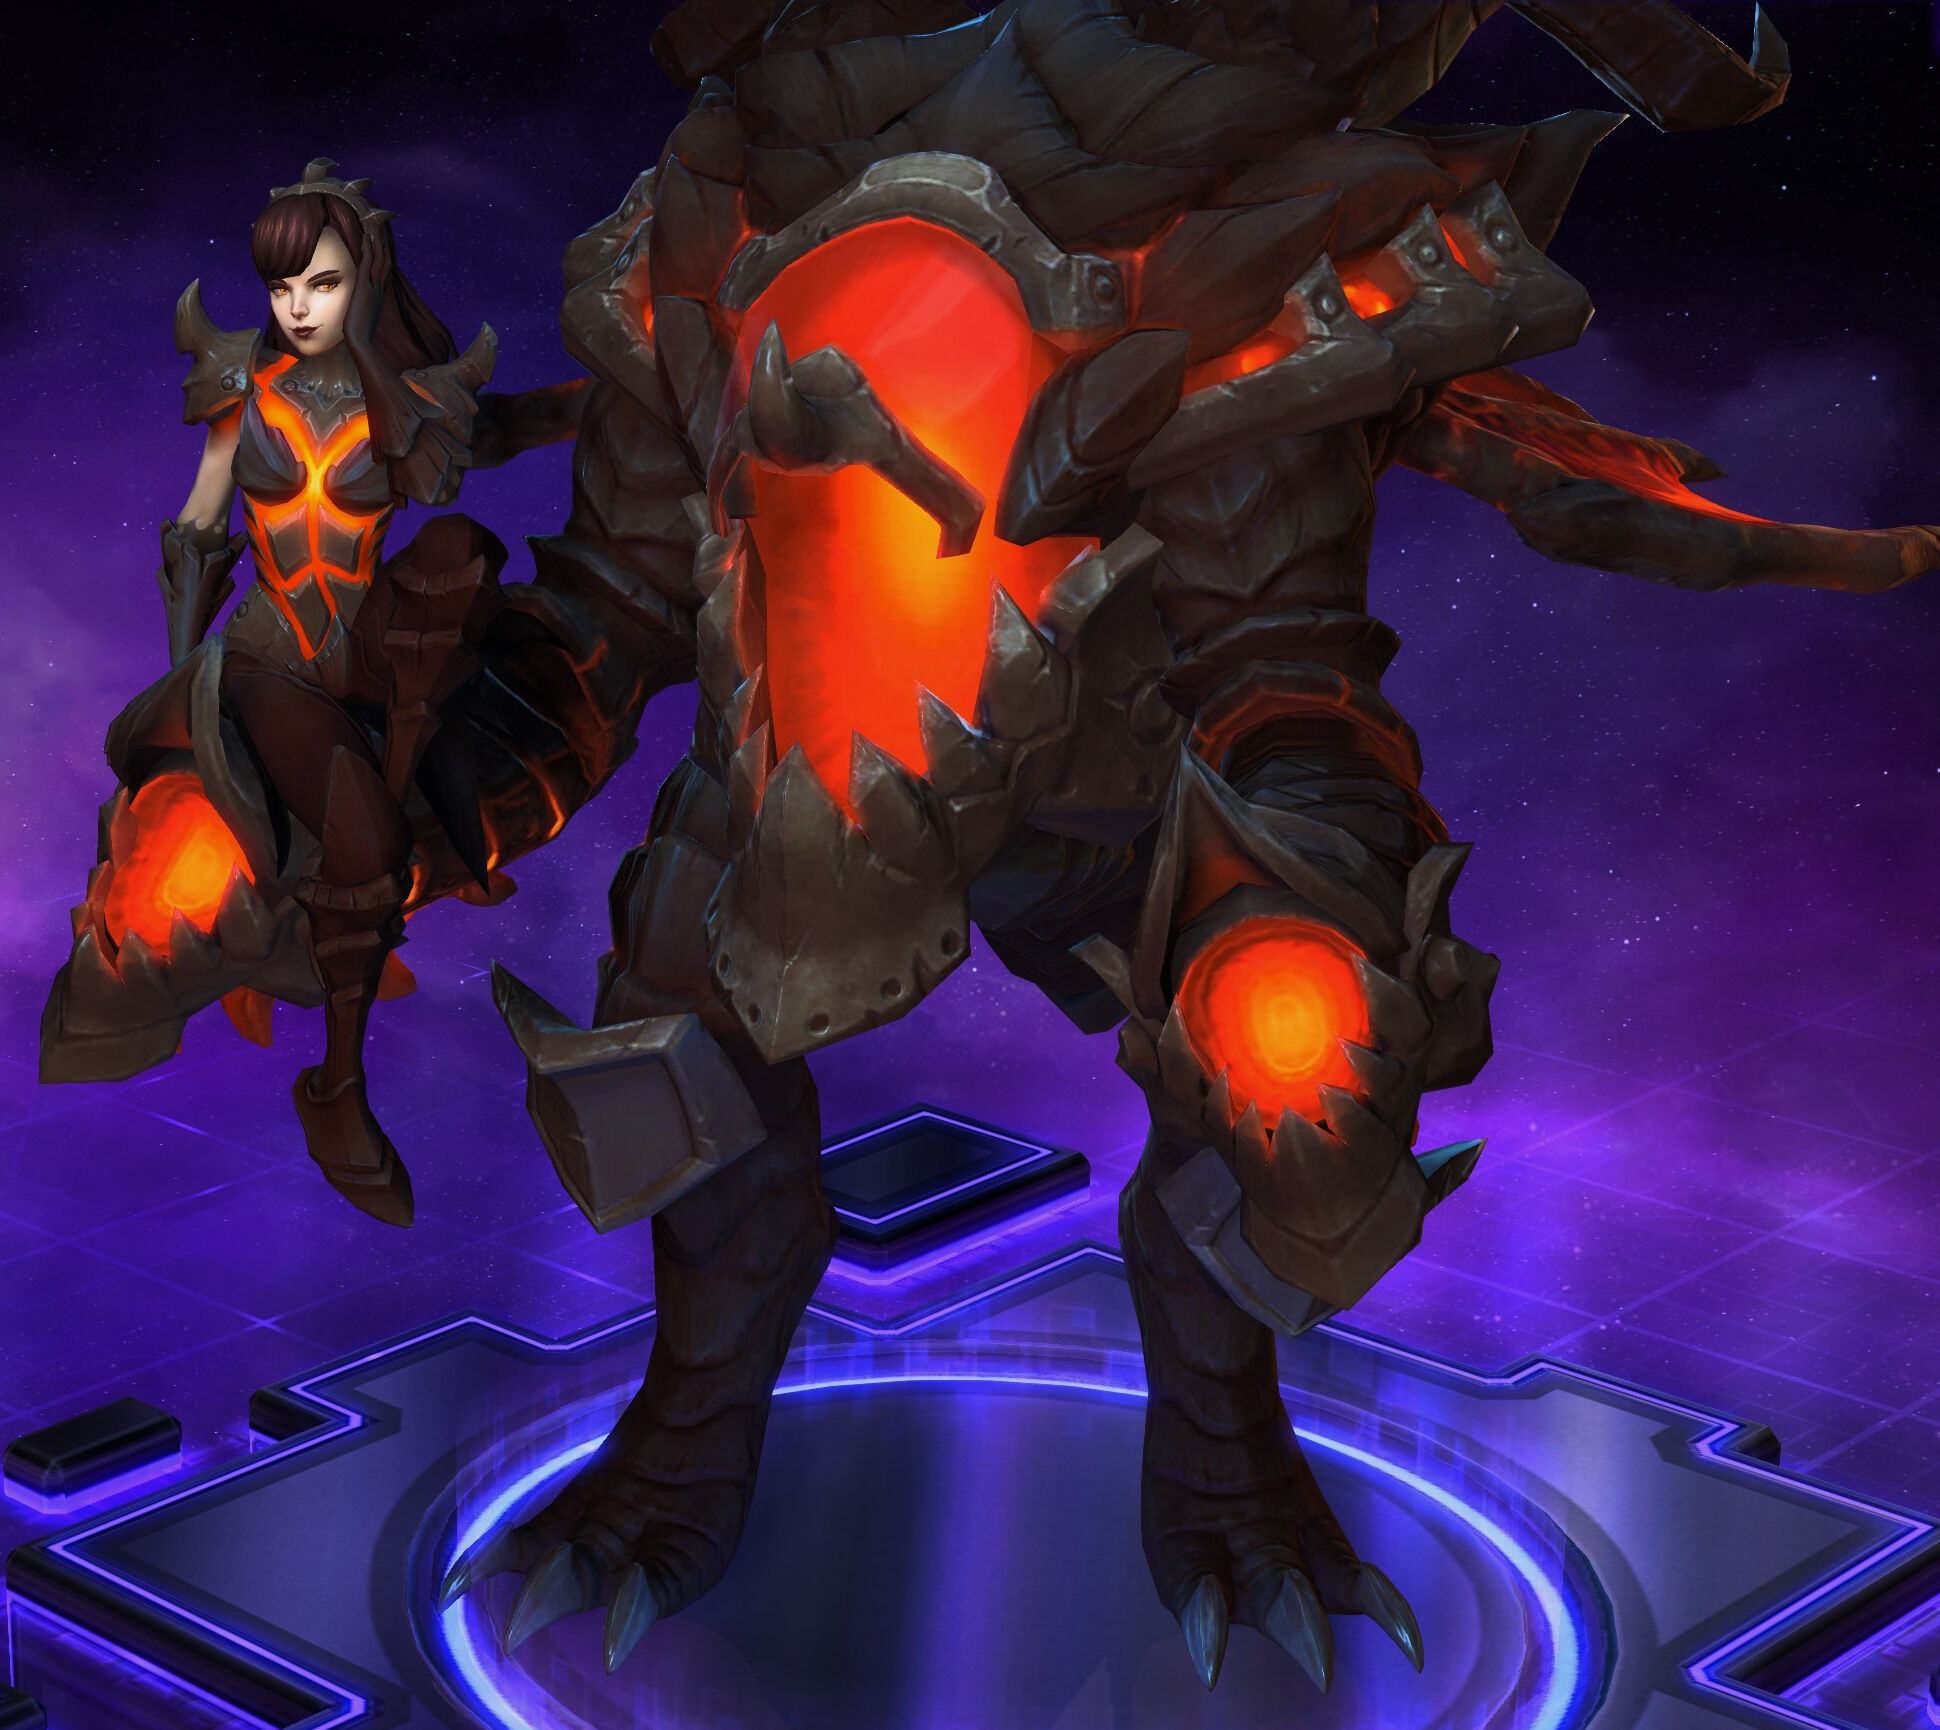 Heroes of the Storm Patch Notes: December 3rd - News - Icy Veins